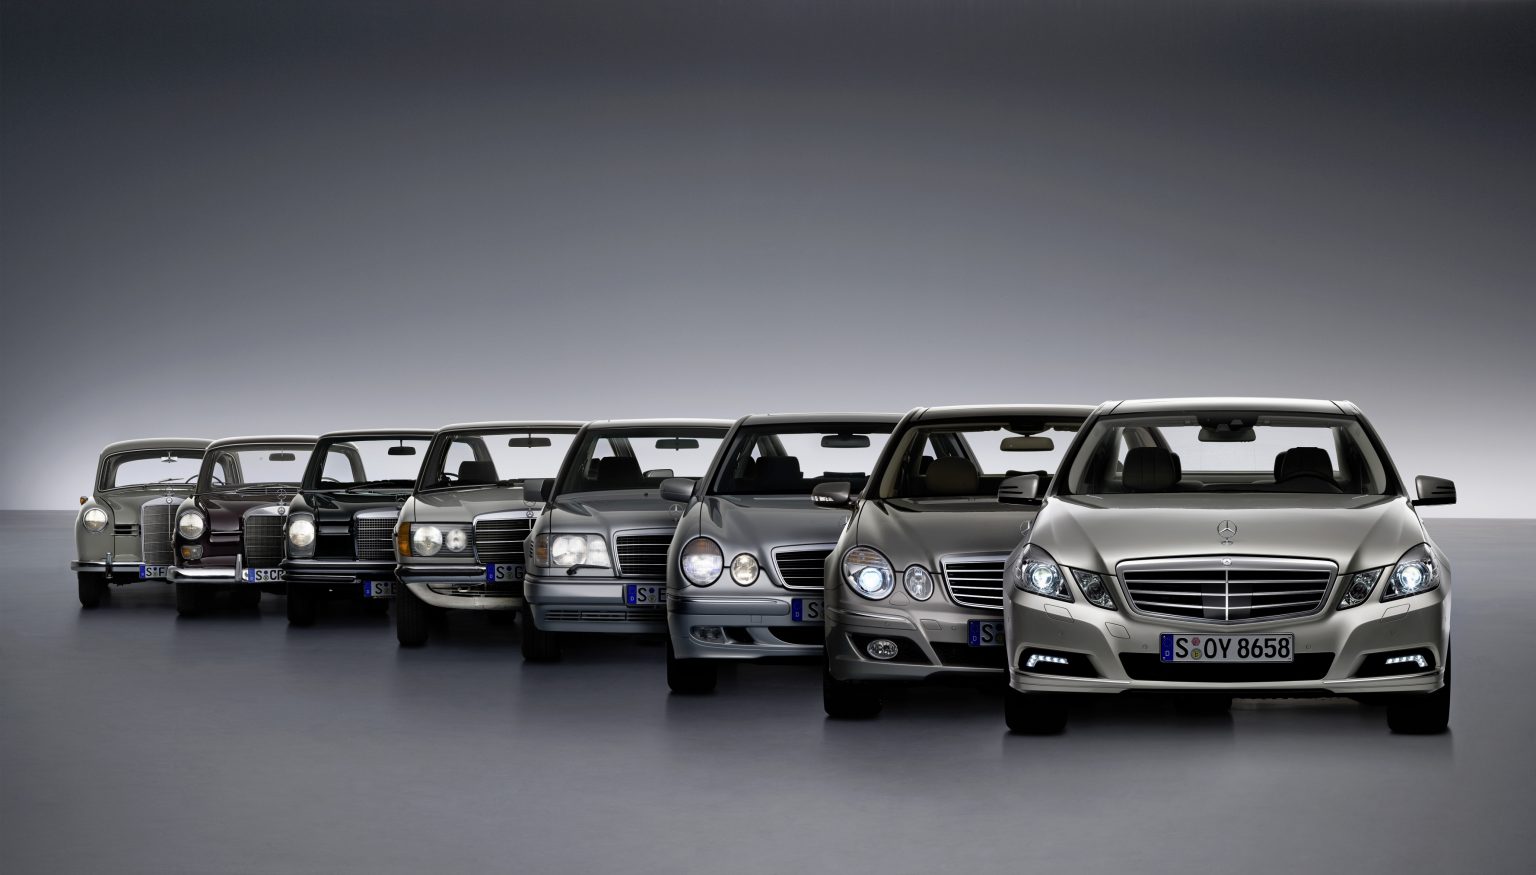 The tradition of the Mercedes-Benz E-Class. From left to right: Ponton Saloon (W 120/W 121), Tail Fin Saloon (W 110), Stroke/8 (W 114/W 115), model series 123, model series 124, model series 210, model series 211 and model series 212.